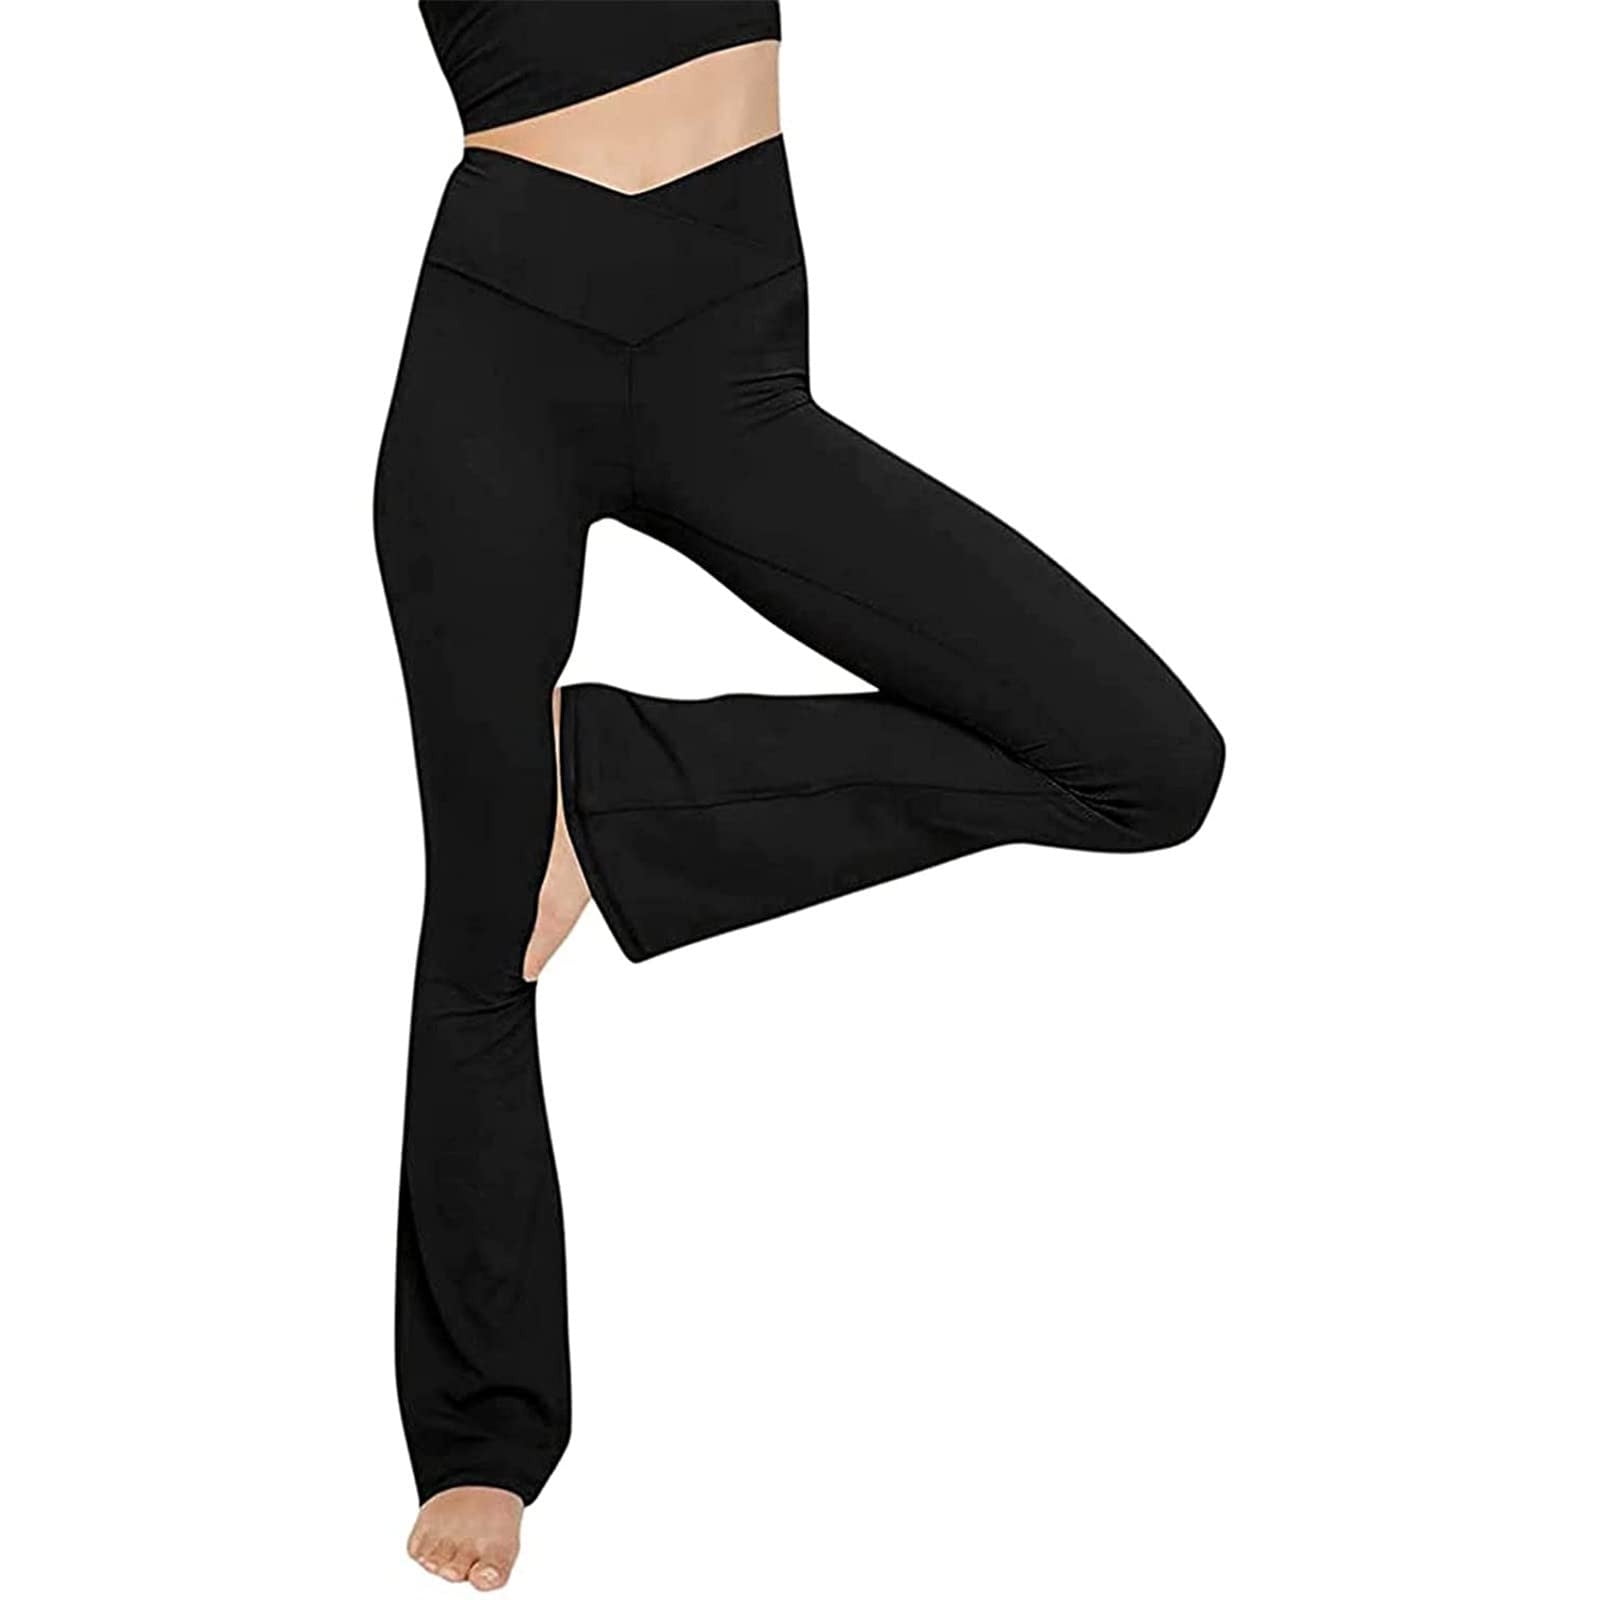 YWDJ Flare Leggings Petite Women Flare Pants High Waisted Workout Leggings  Stretch Non See Through Tummy Control Bootcut Yoga Pants Black S 